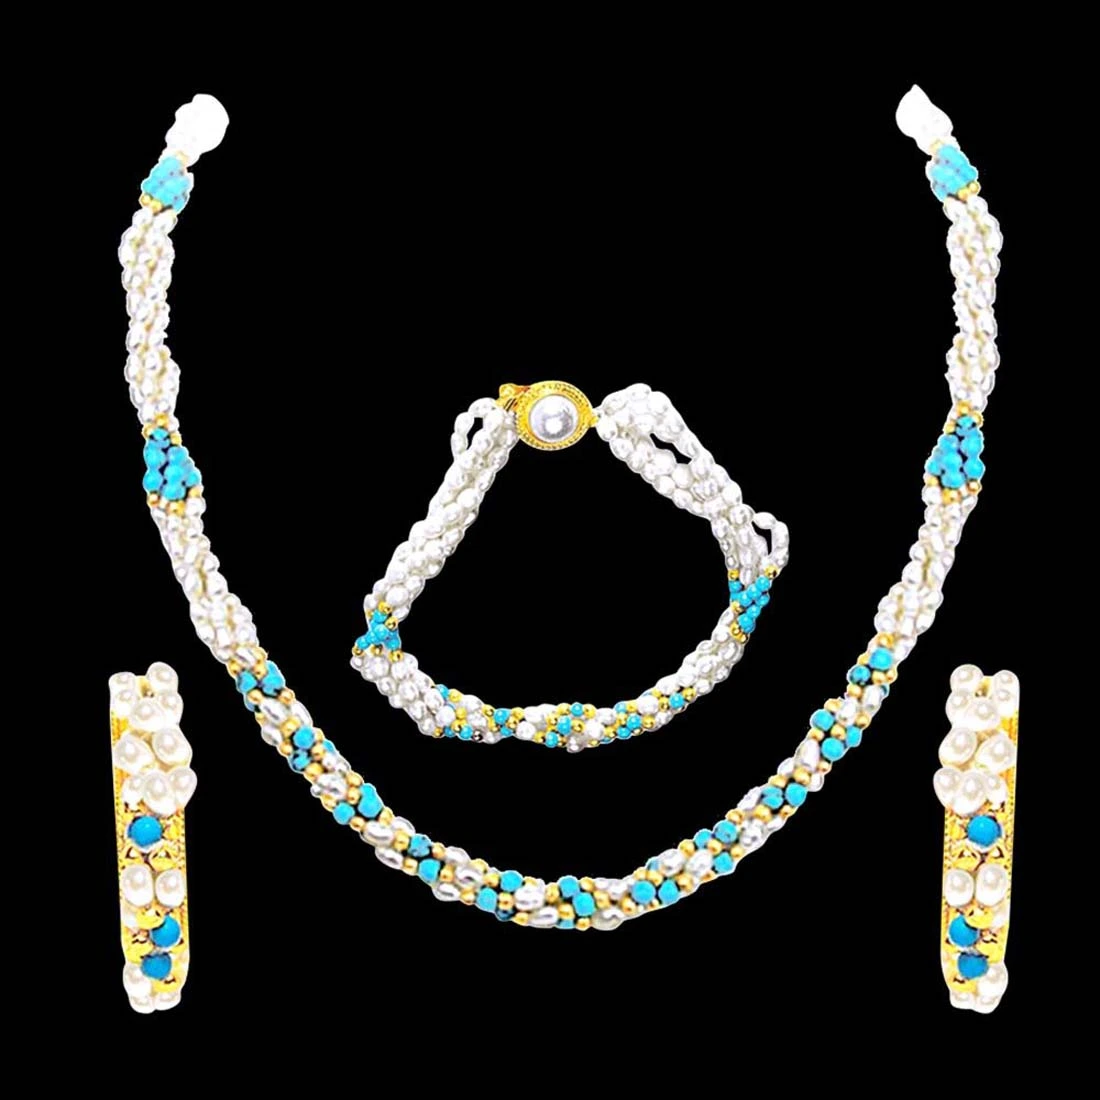 Splendid Perfection - 3 Line Twisted Real Rice Pearl & Turquoise Beads Necklace, Earring & Bracelet Set for Women (SP99)